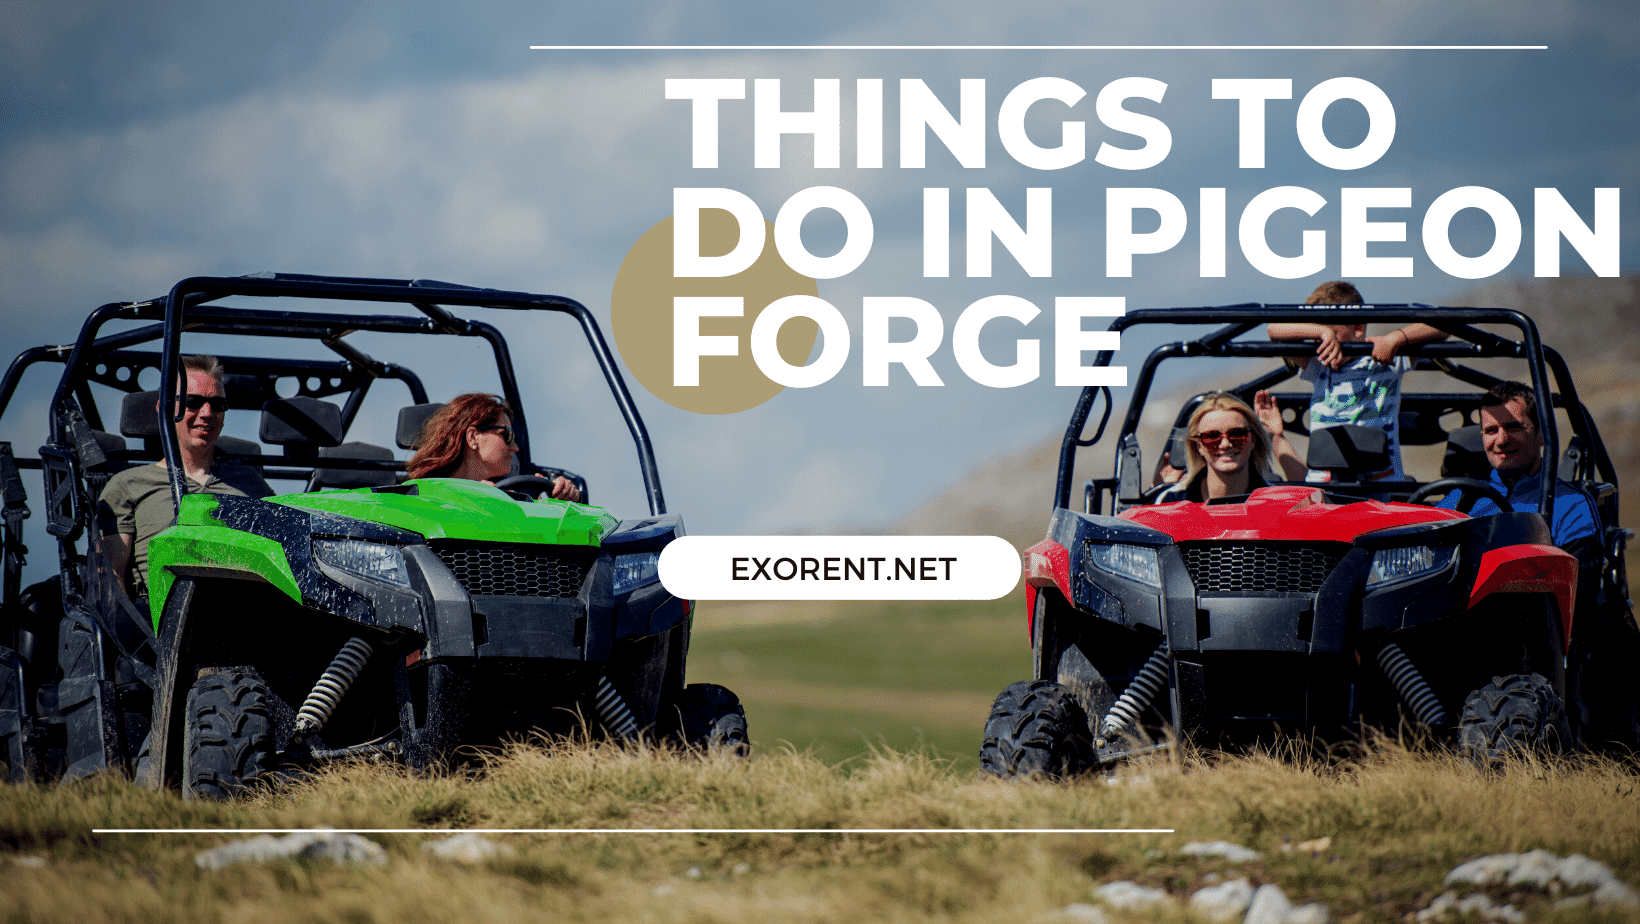 15 Family Friendly Things To Do In Pigeon Forge TN